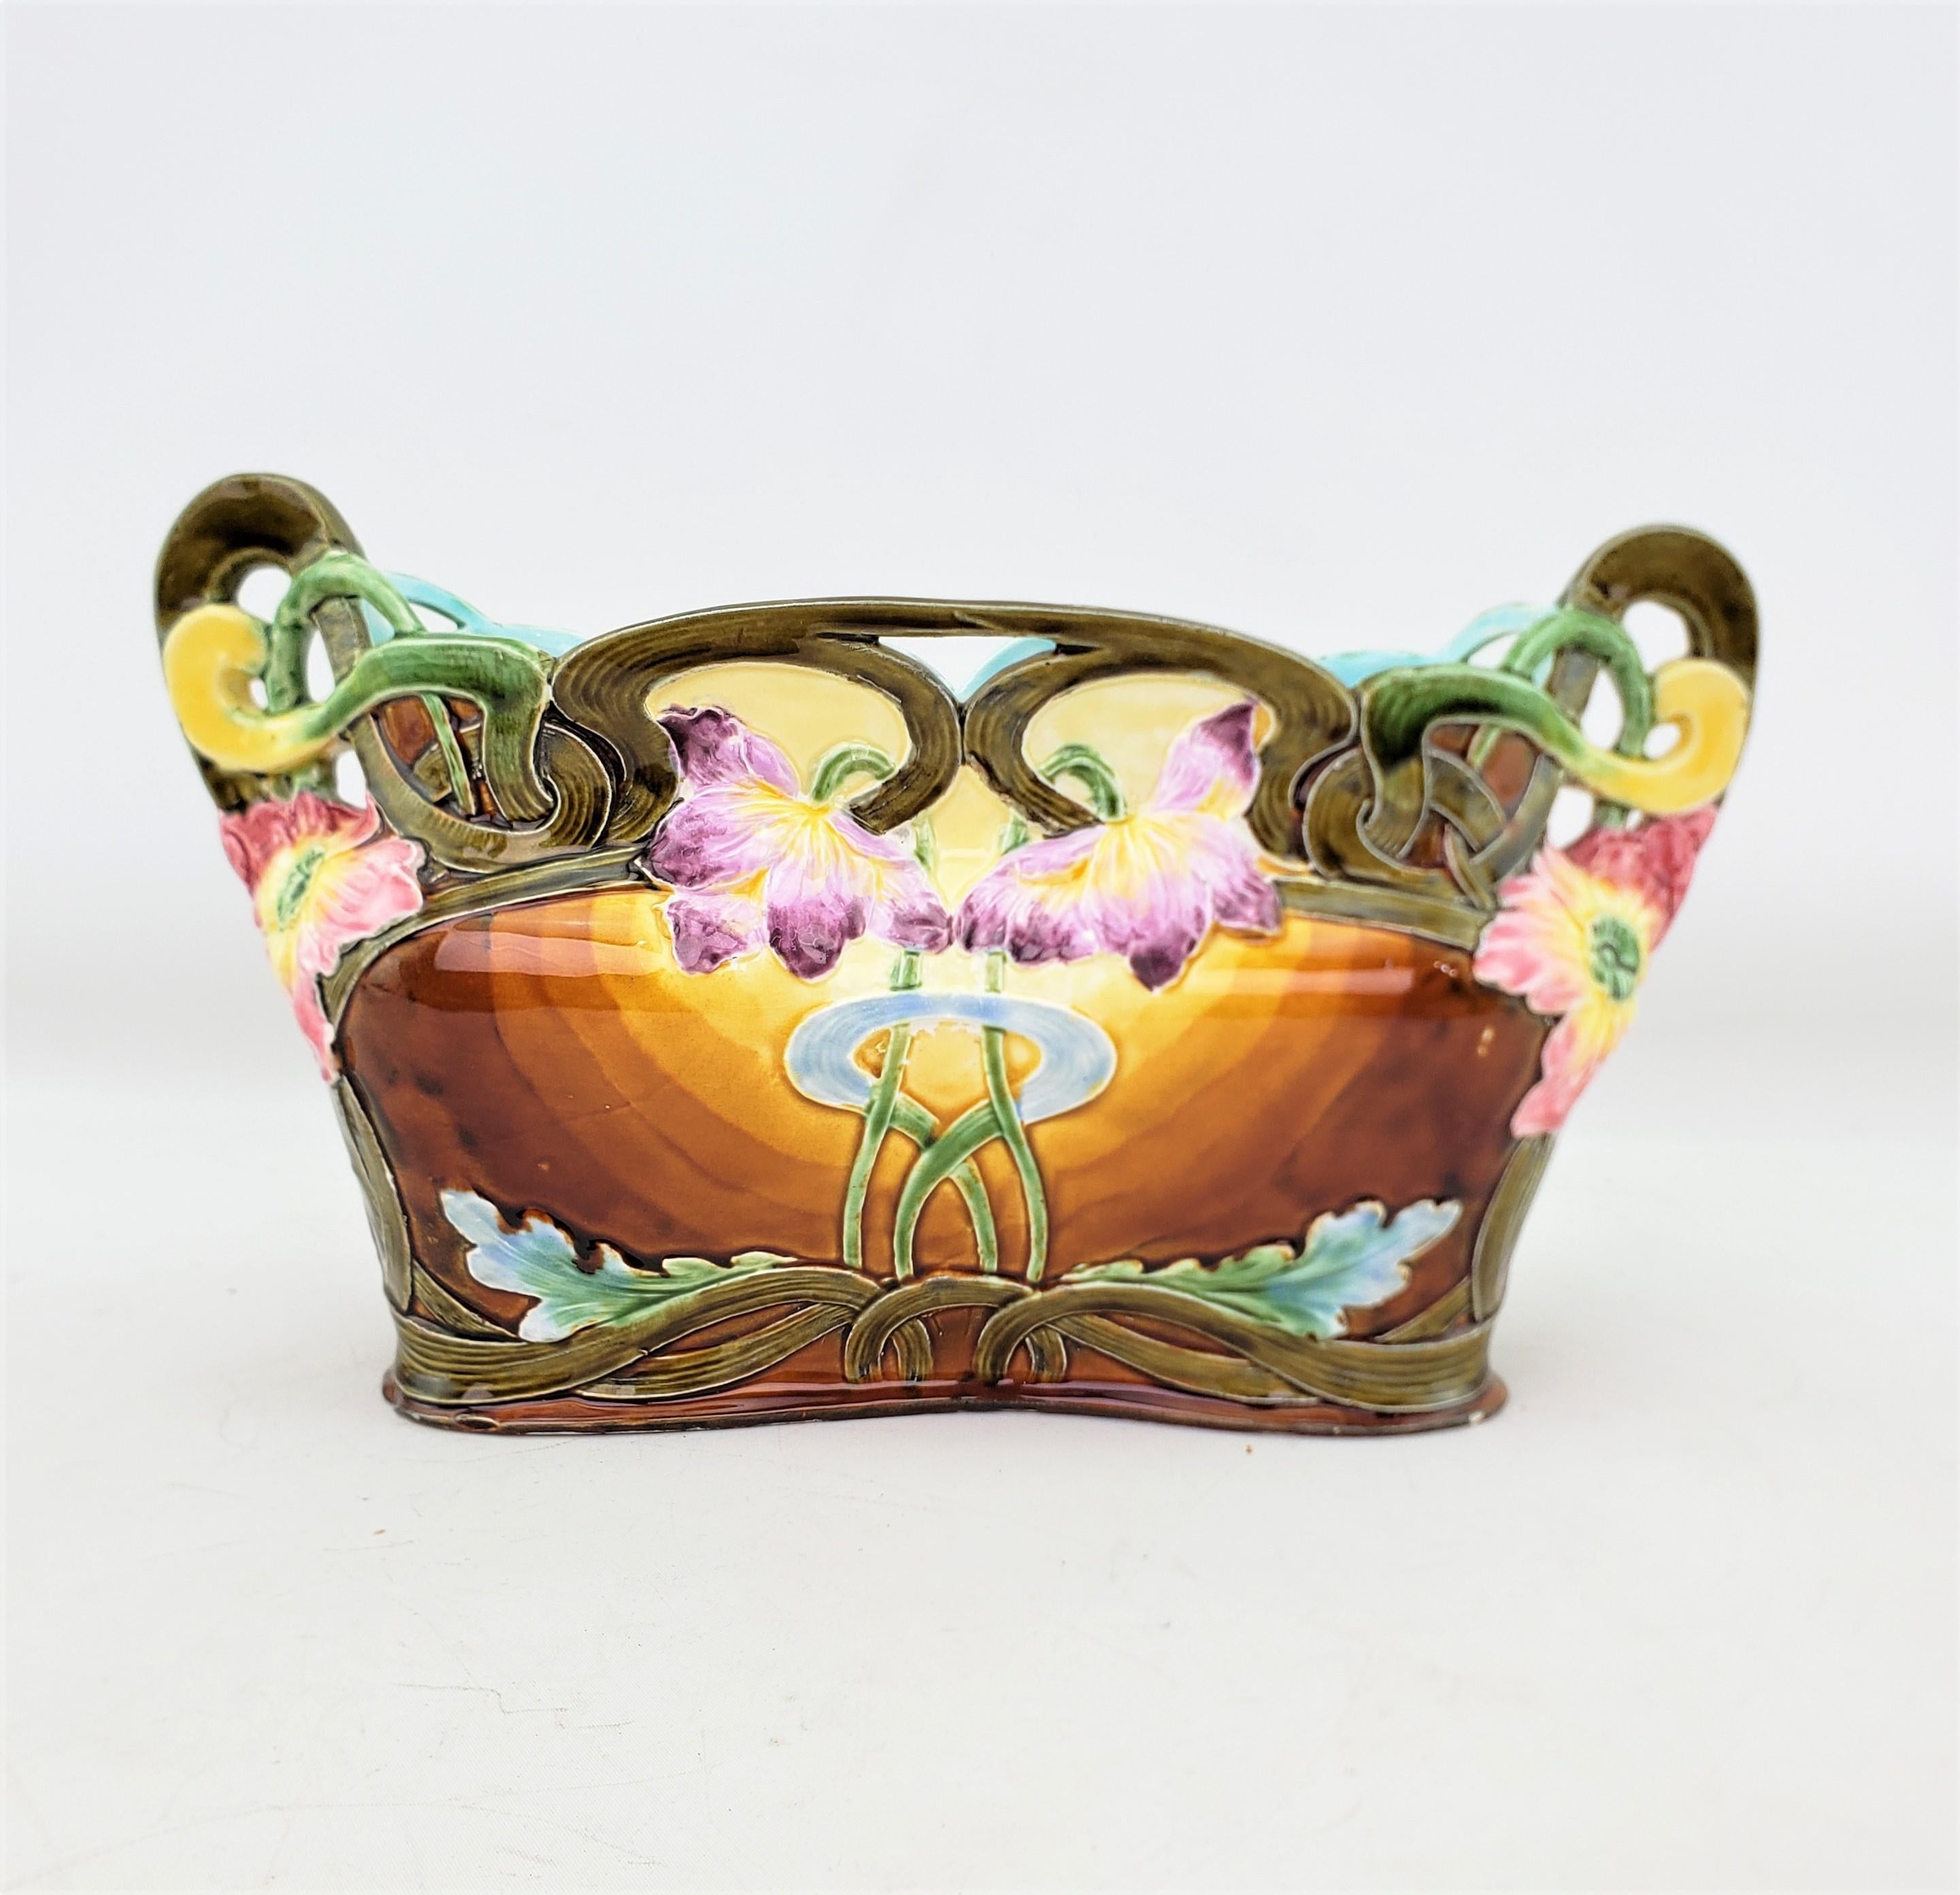 Molded Antique English Majolica Planter or Jardiniere with Floral Decoration For Sale